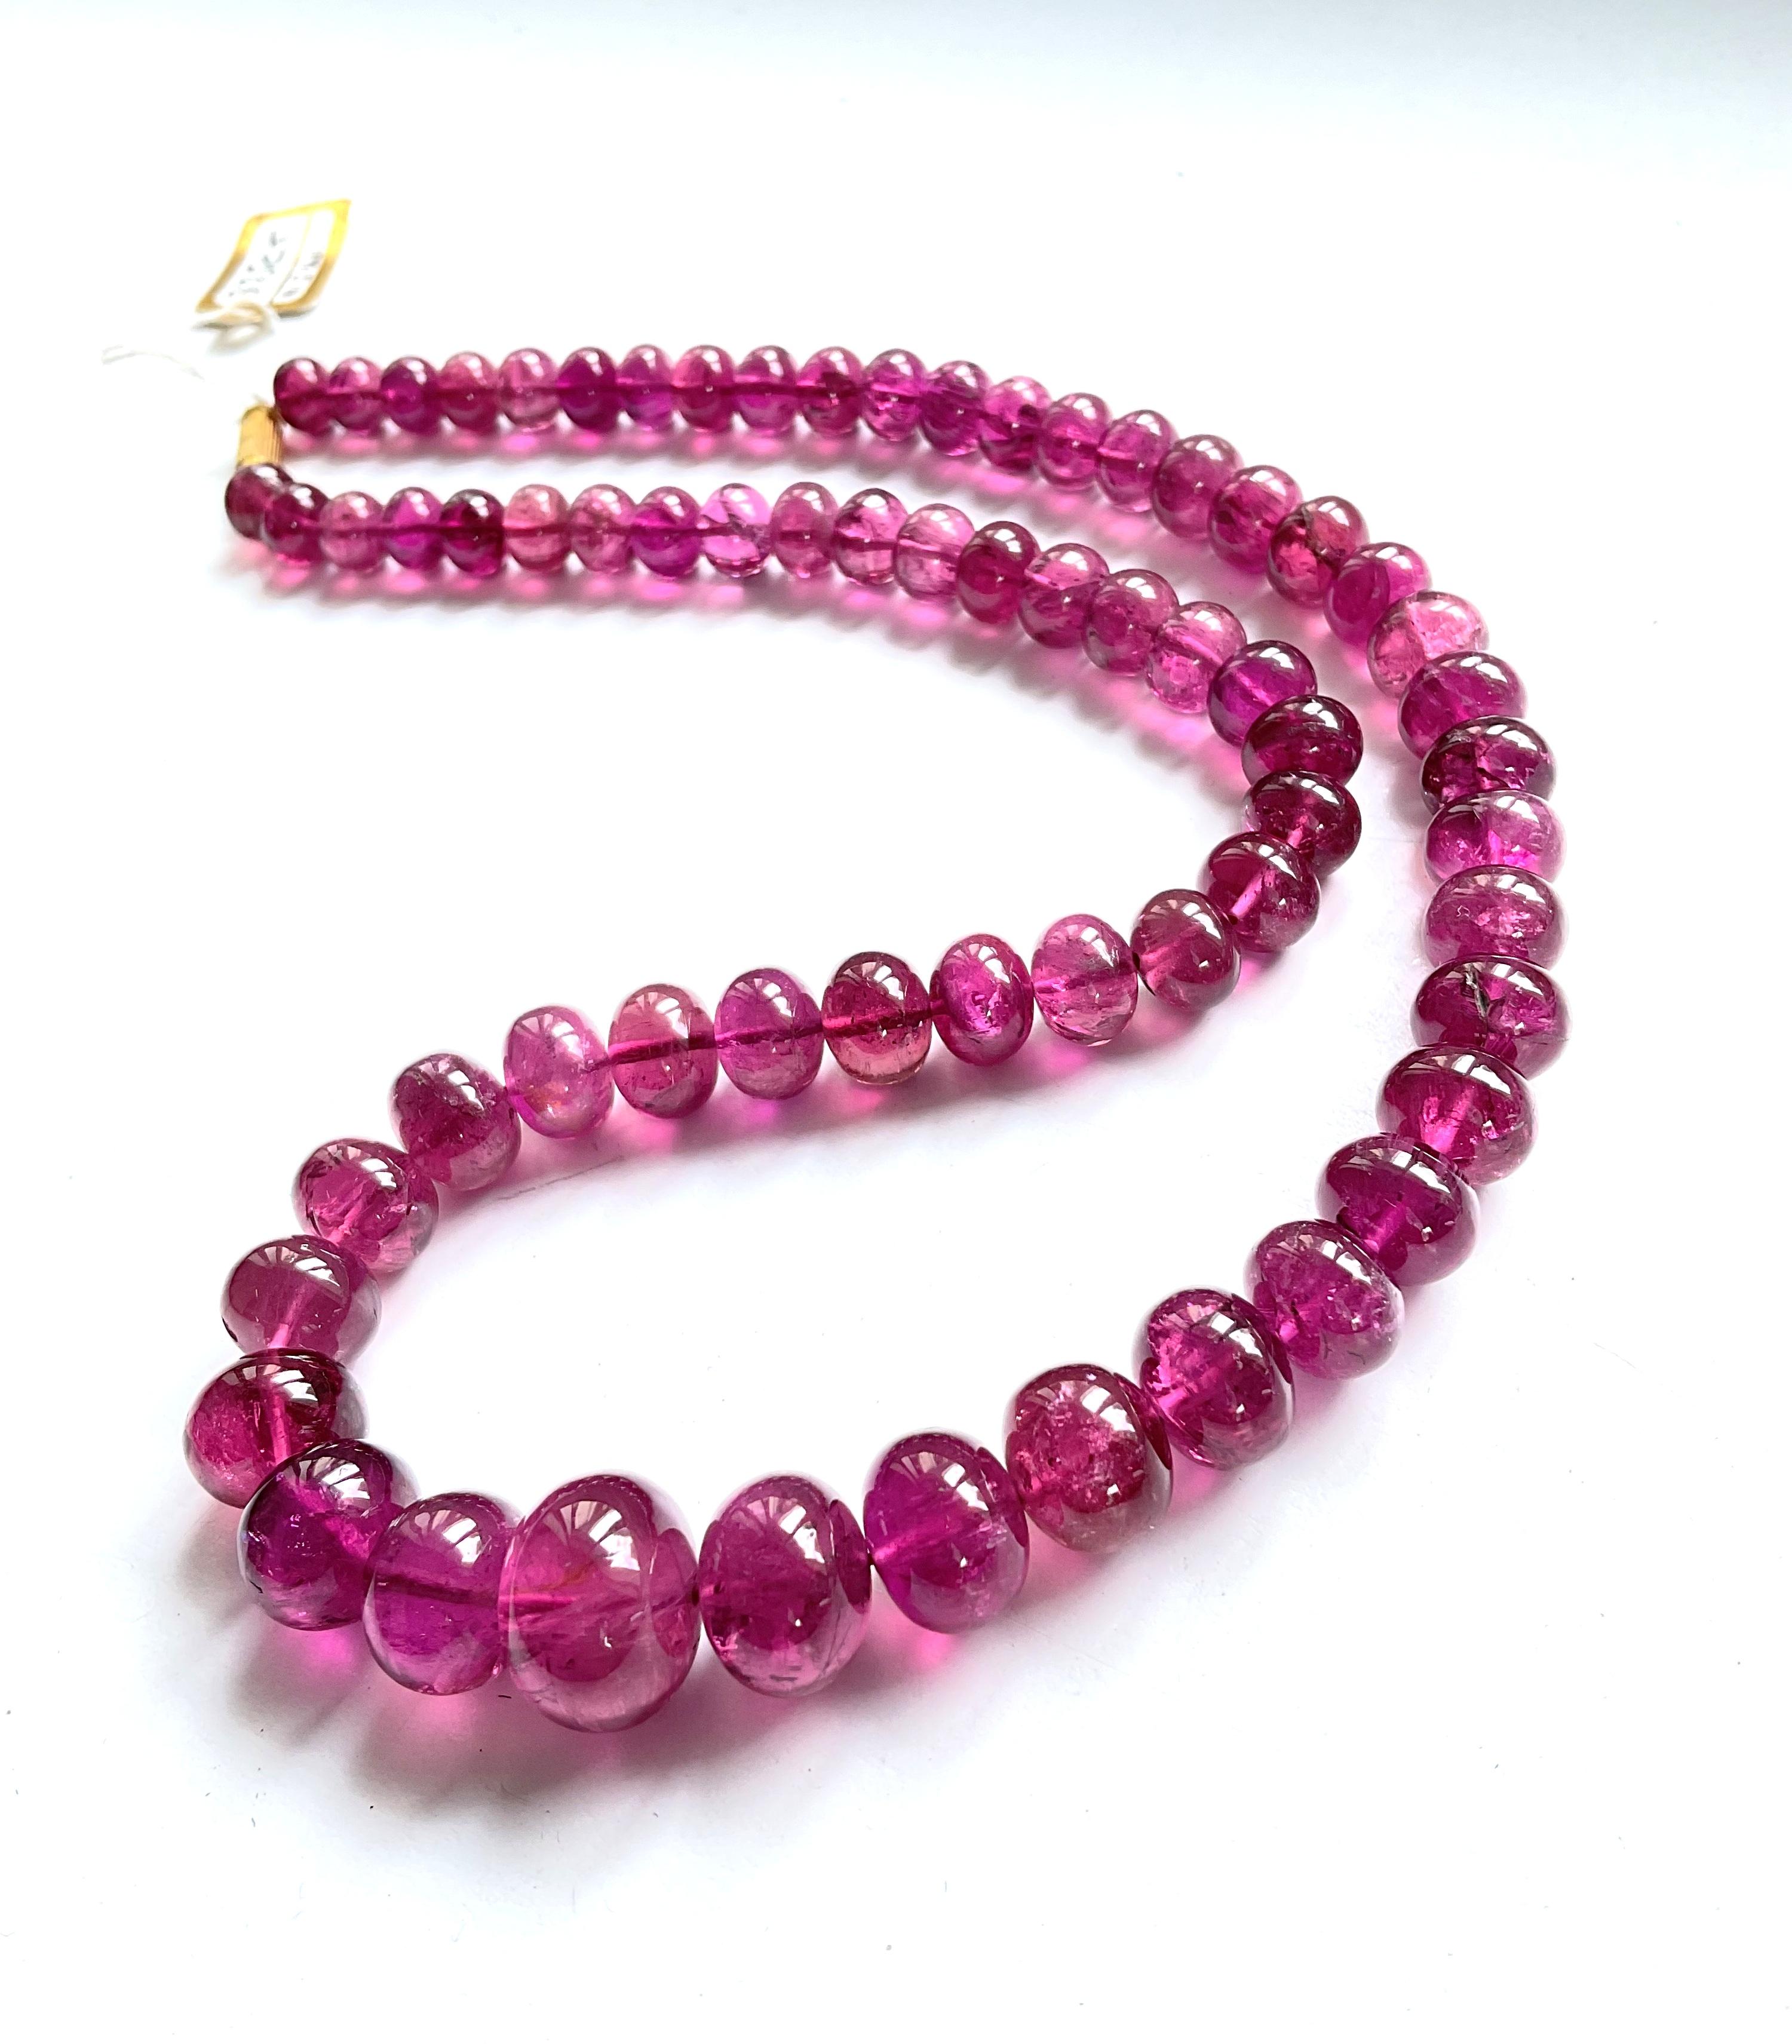 335.01 Carats Top Quality Rubellite Tourmaline Beads Natural Gemstones necklace